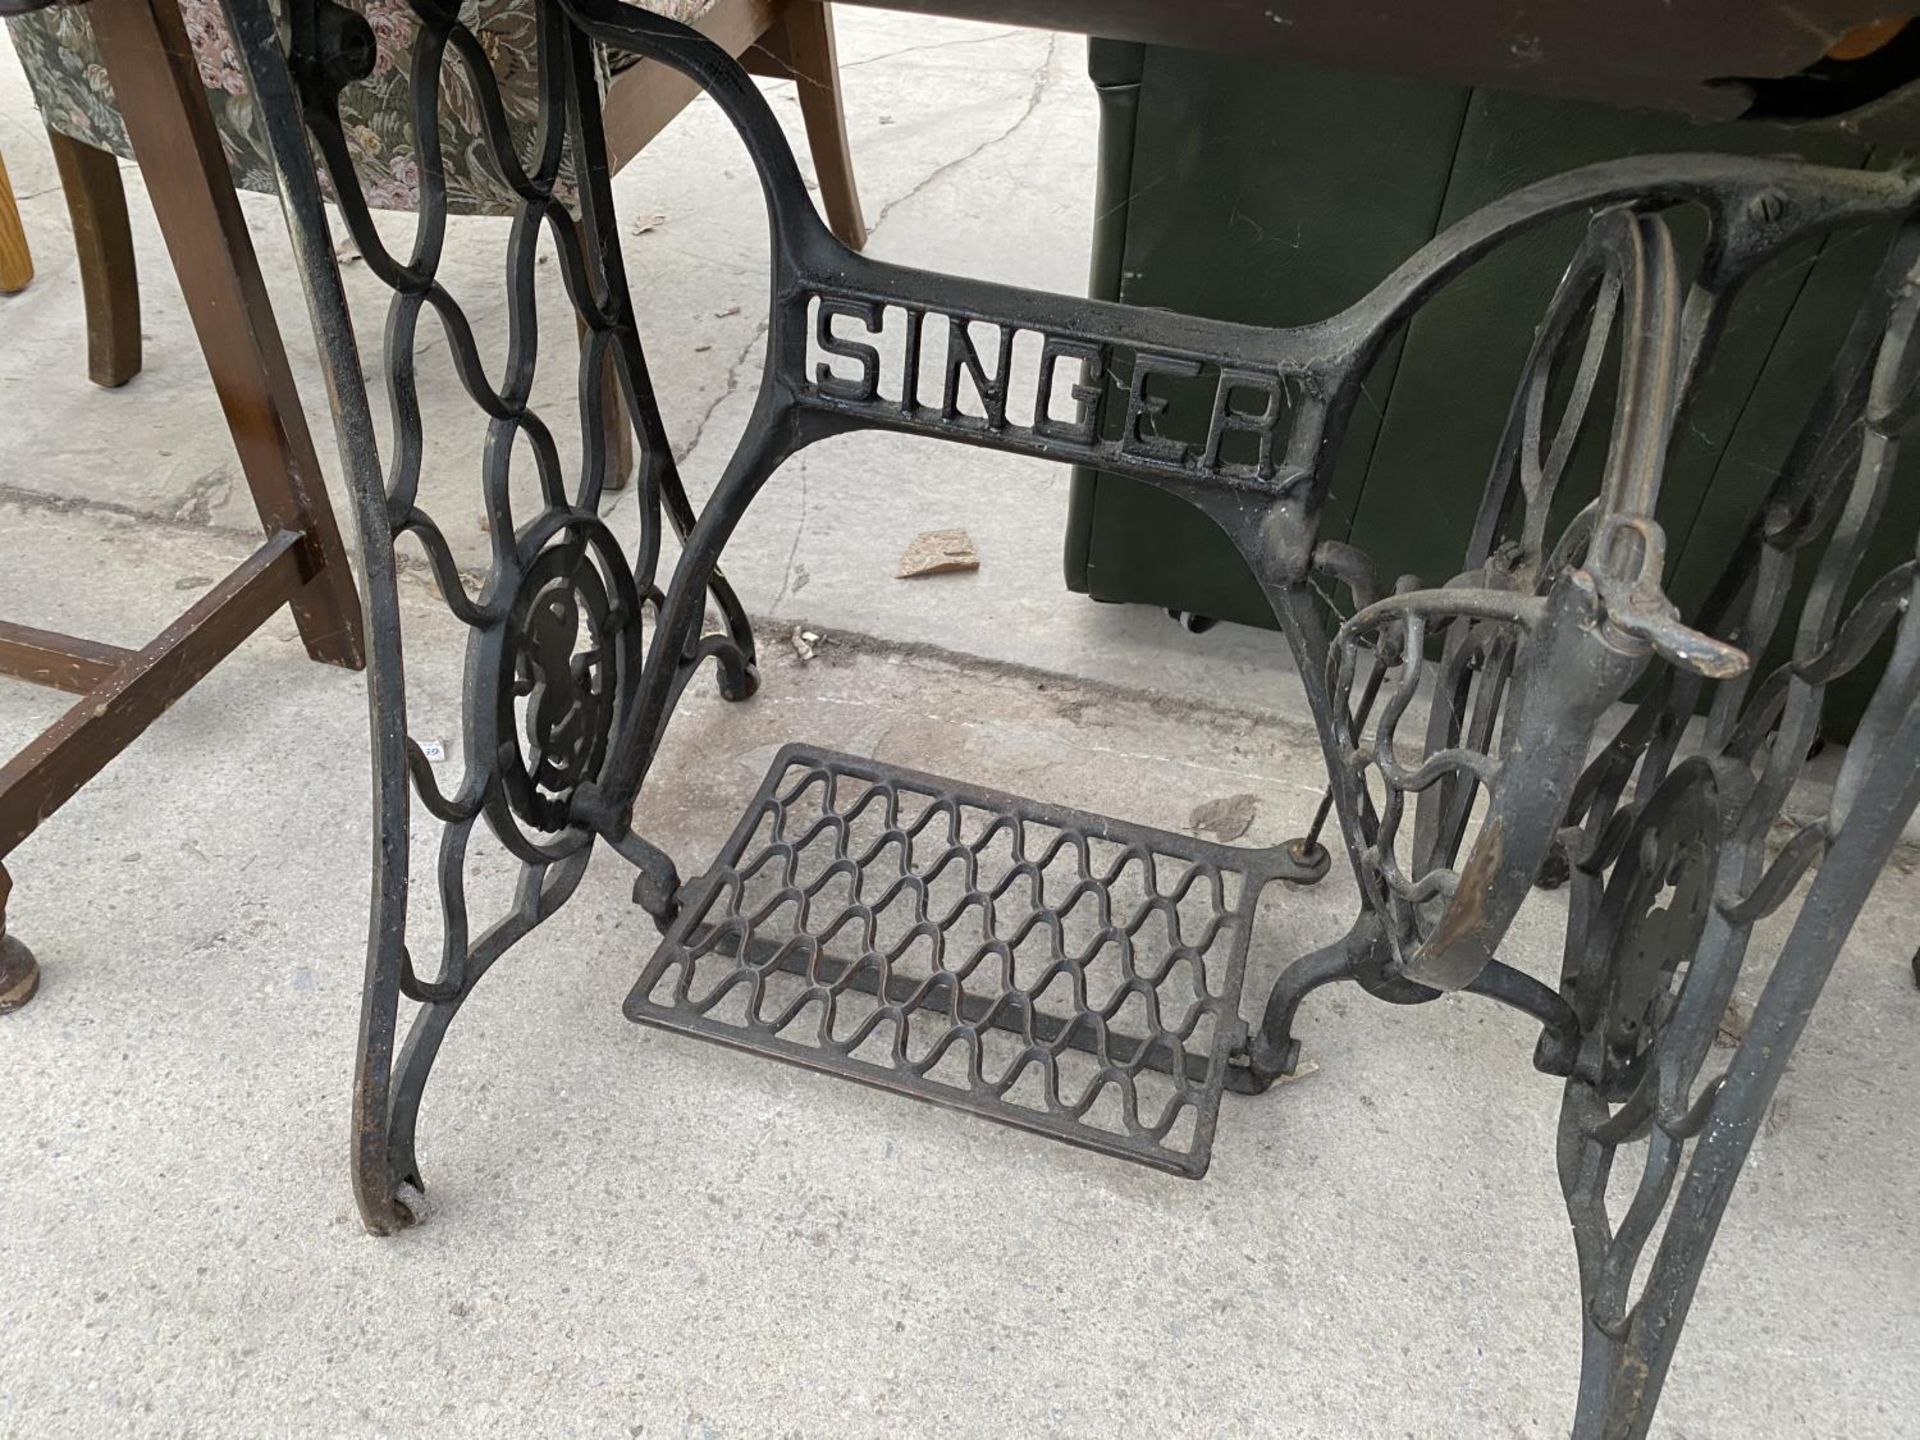 A SINGER ELECTRIC SEWING MACHINE ON A TREADLE BASE - Image 4 of 4